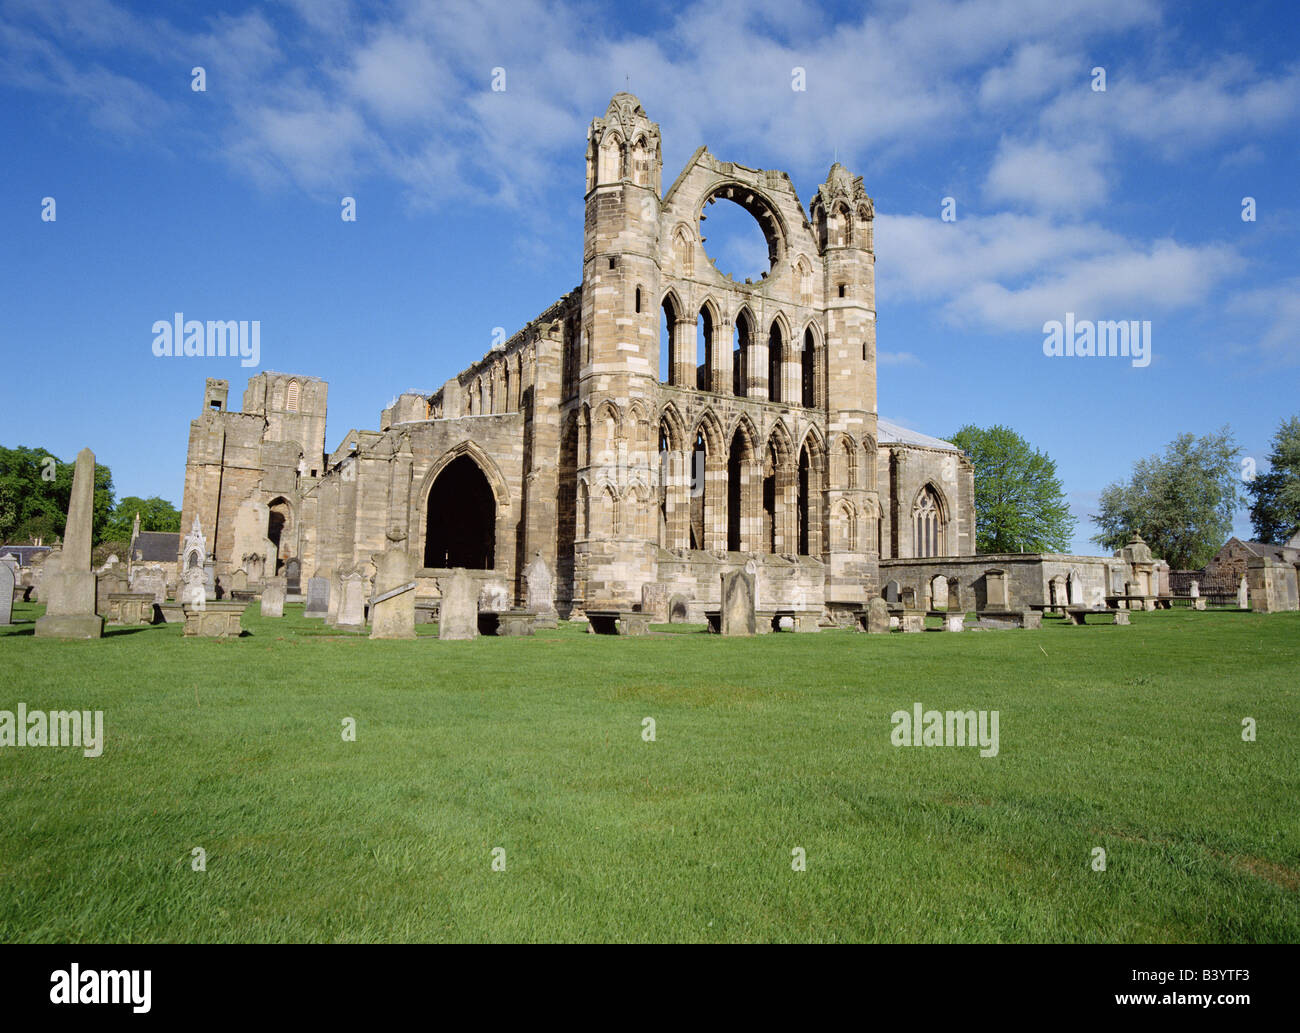 dh Elgin cathedral ELGIN MORAY East wall scotland ruined monastery uk historical ruins abandoned scottish cathedrals Stock Photo